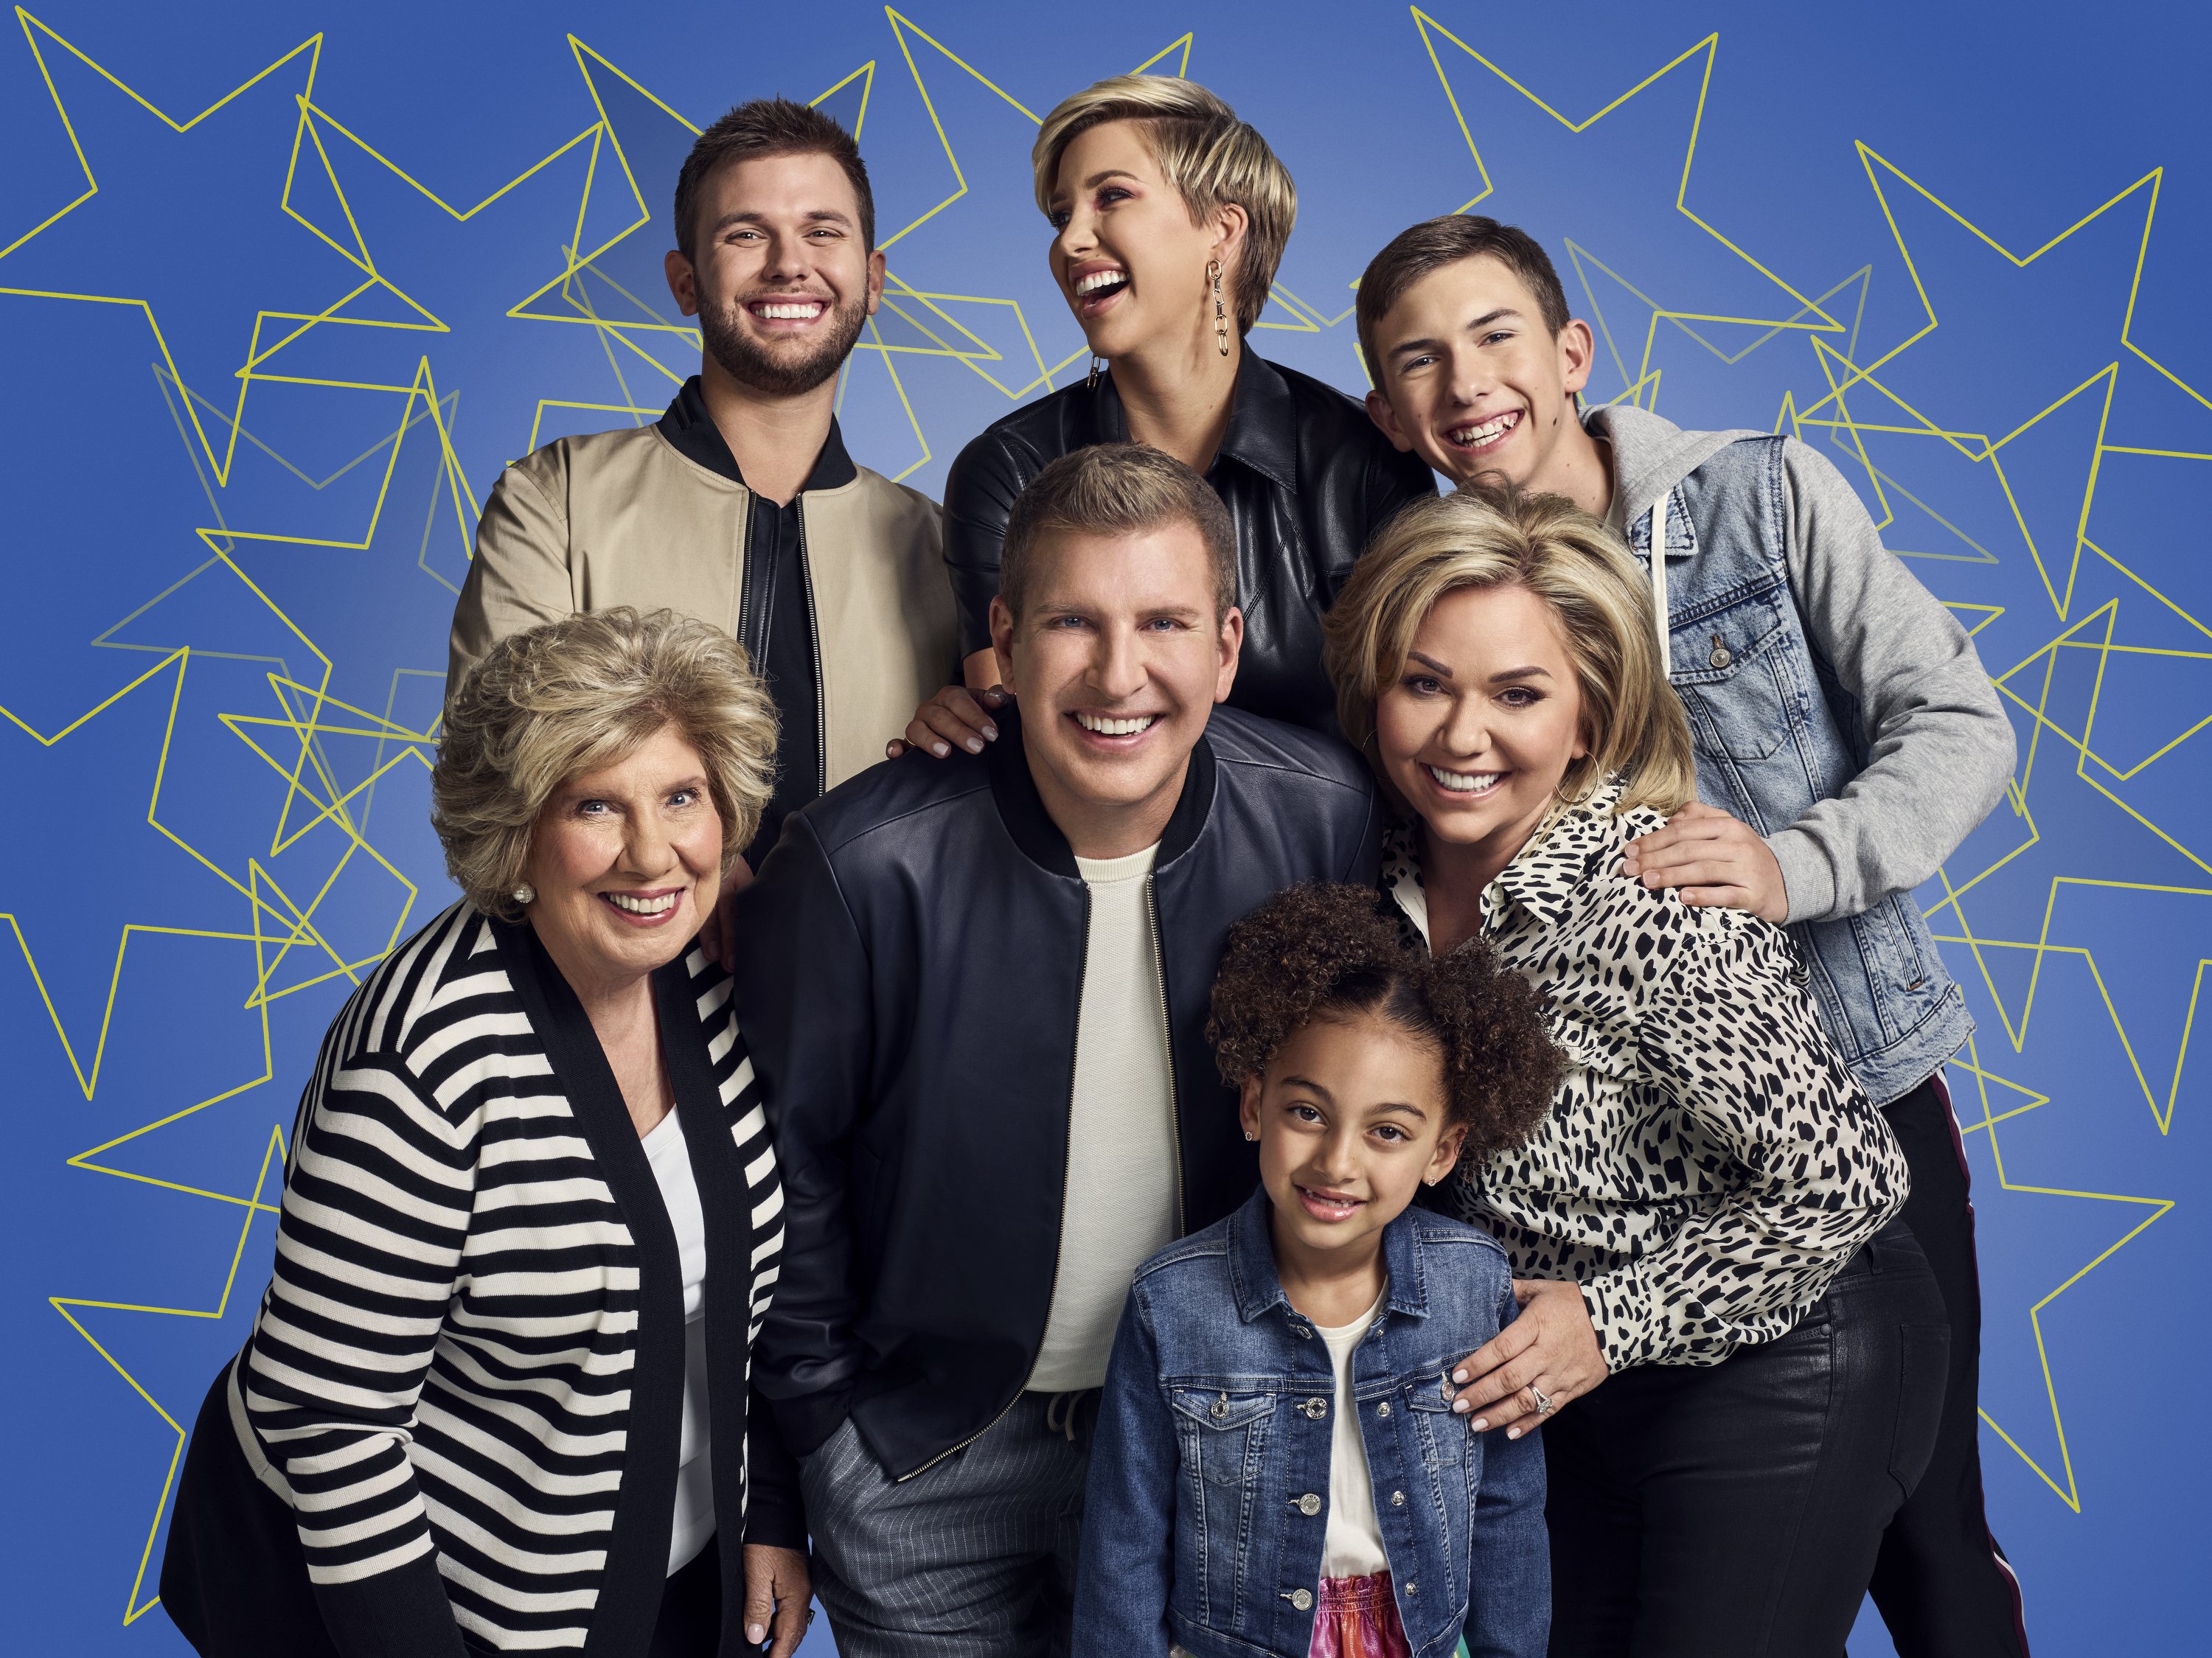 A portrait picture of Faye Chrisley, Chase Chrisley, Todd Chrisley, Savannah Chrisley, Chloe Chrisley, Julie Chrisley, Grayson Chrisley. | Source: Getty Images.